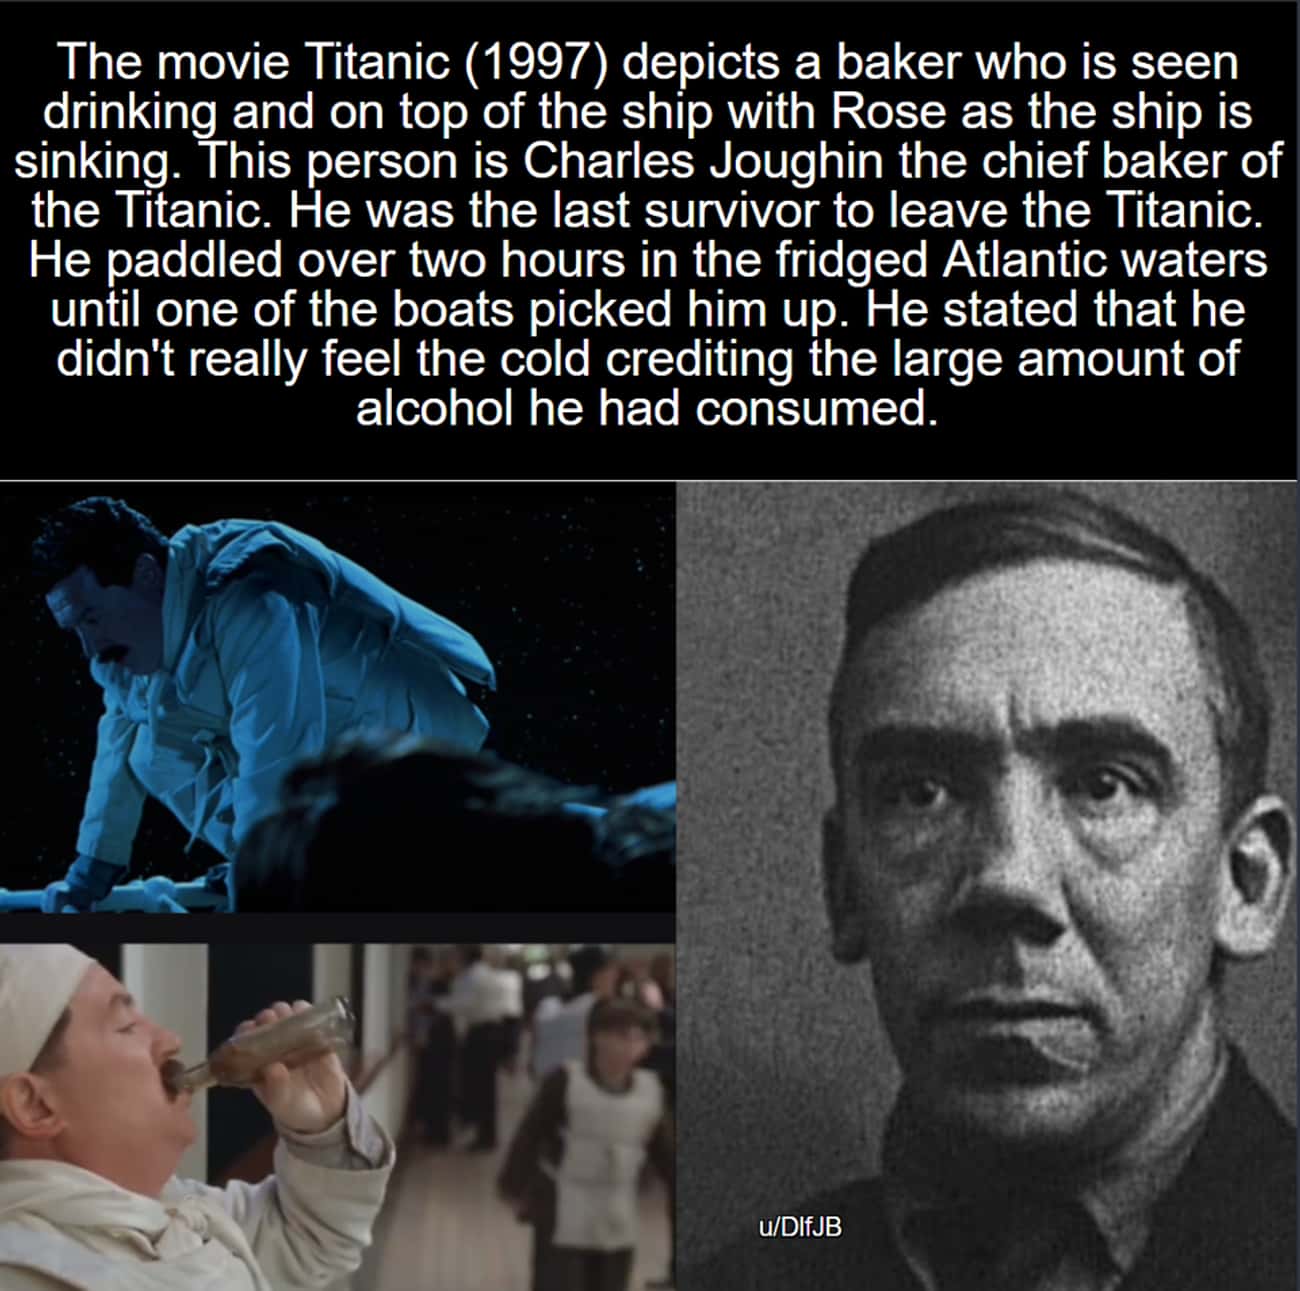 The Life Of Chief Baker Charles Joughin Is Shown Throughout The Movie